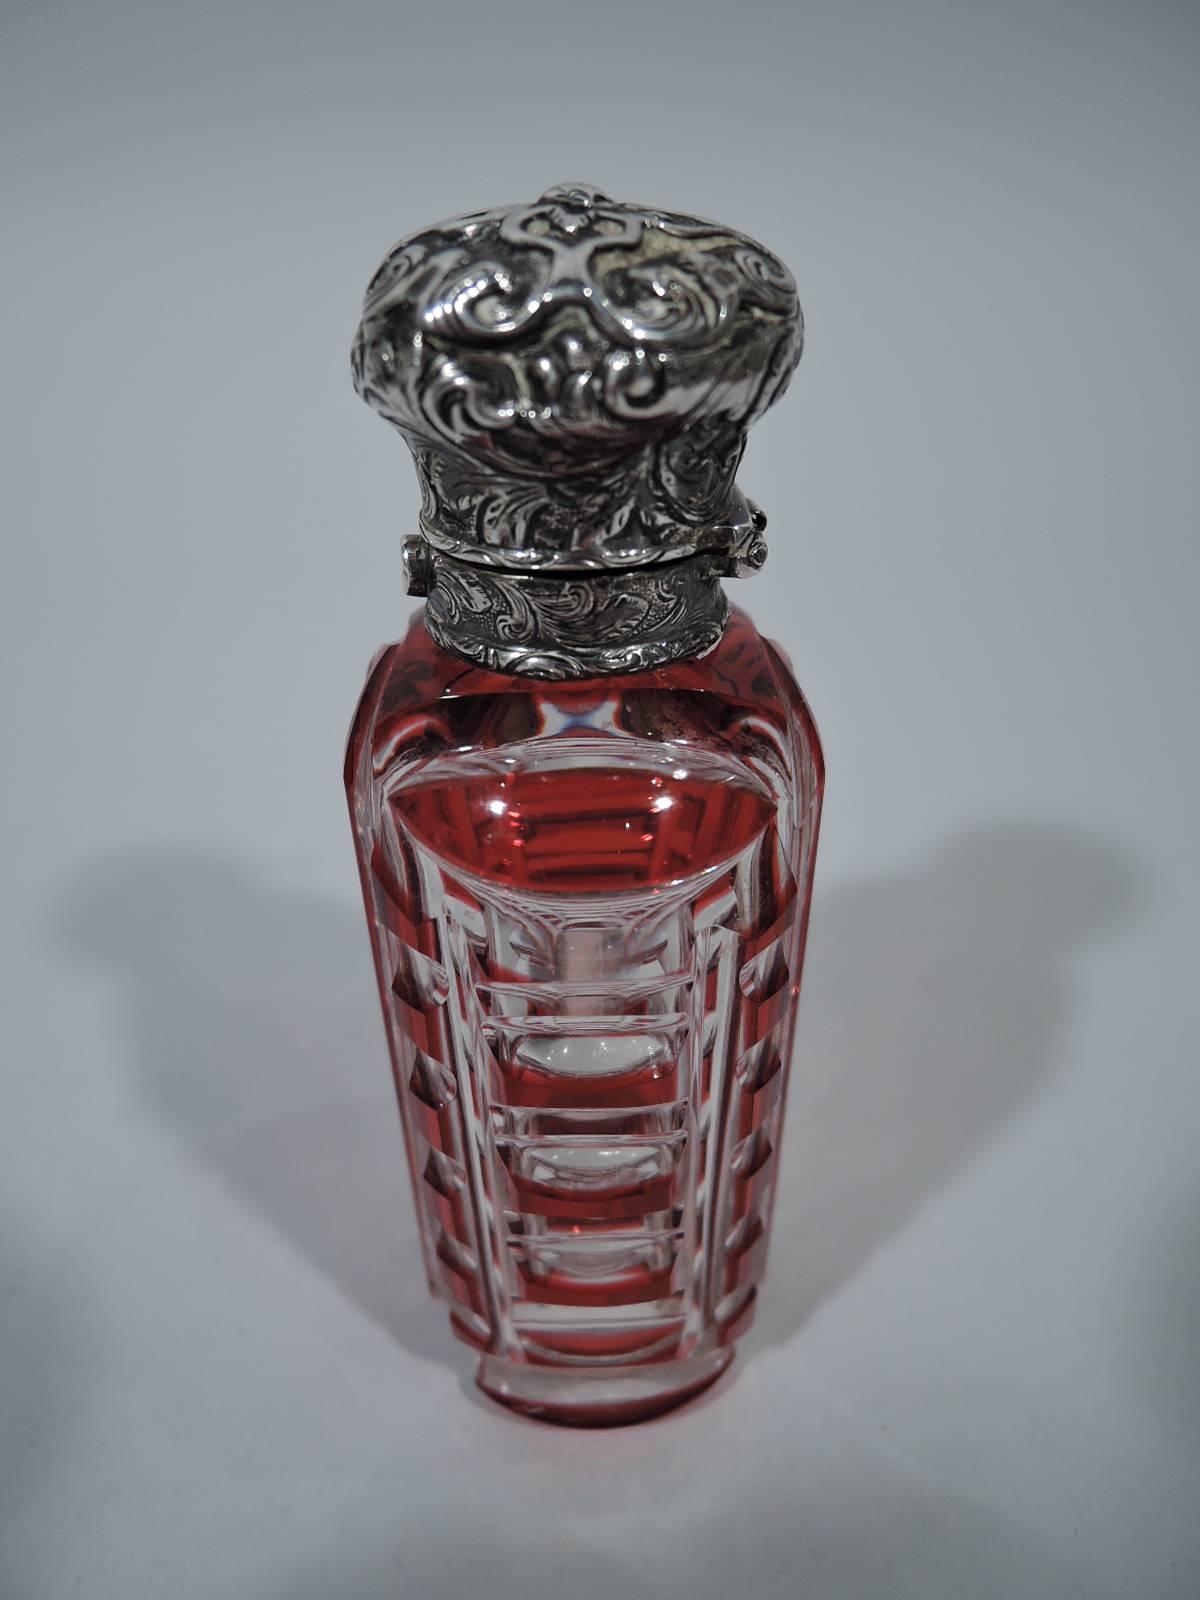 European silver and cut-to-clear red glass perfume, circa 1880. Ovoid bottle with cut geometric ornament. Silver collar and hinged bun cover with worked scrolls. Tactile and eclectic. Unmarked.